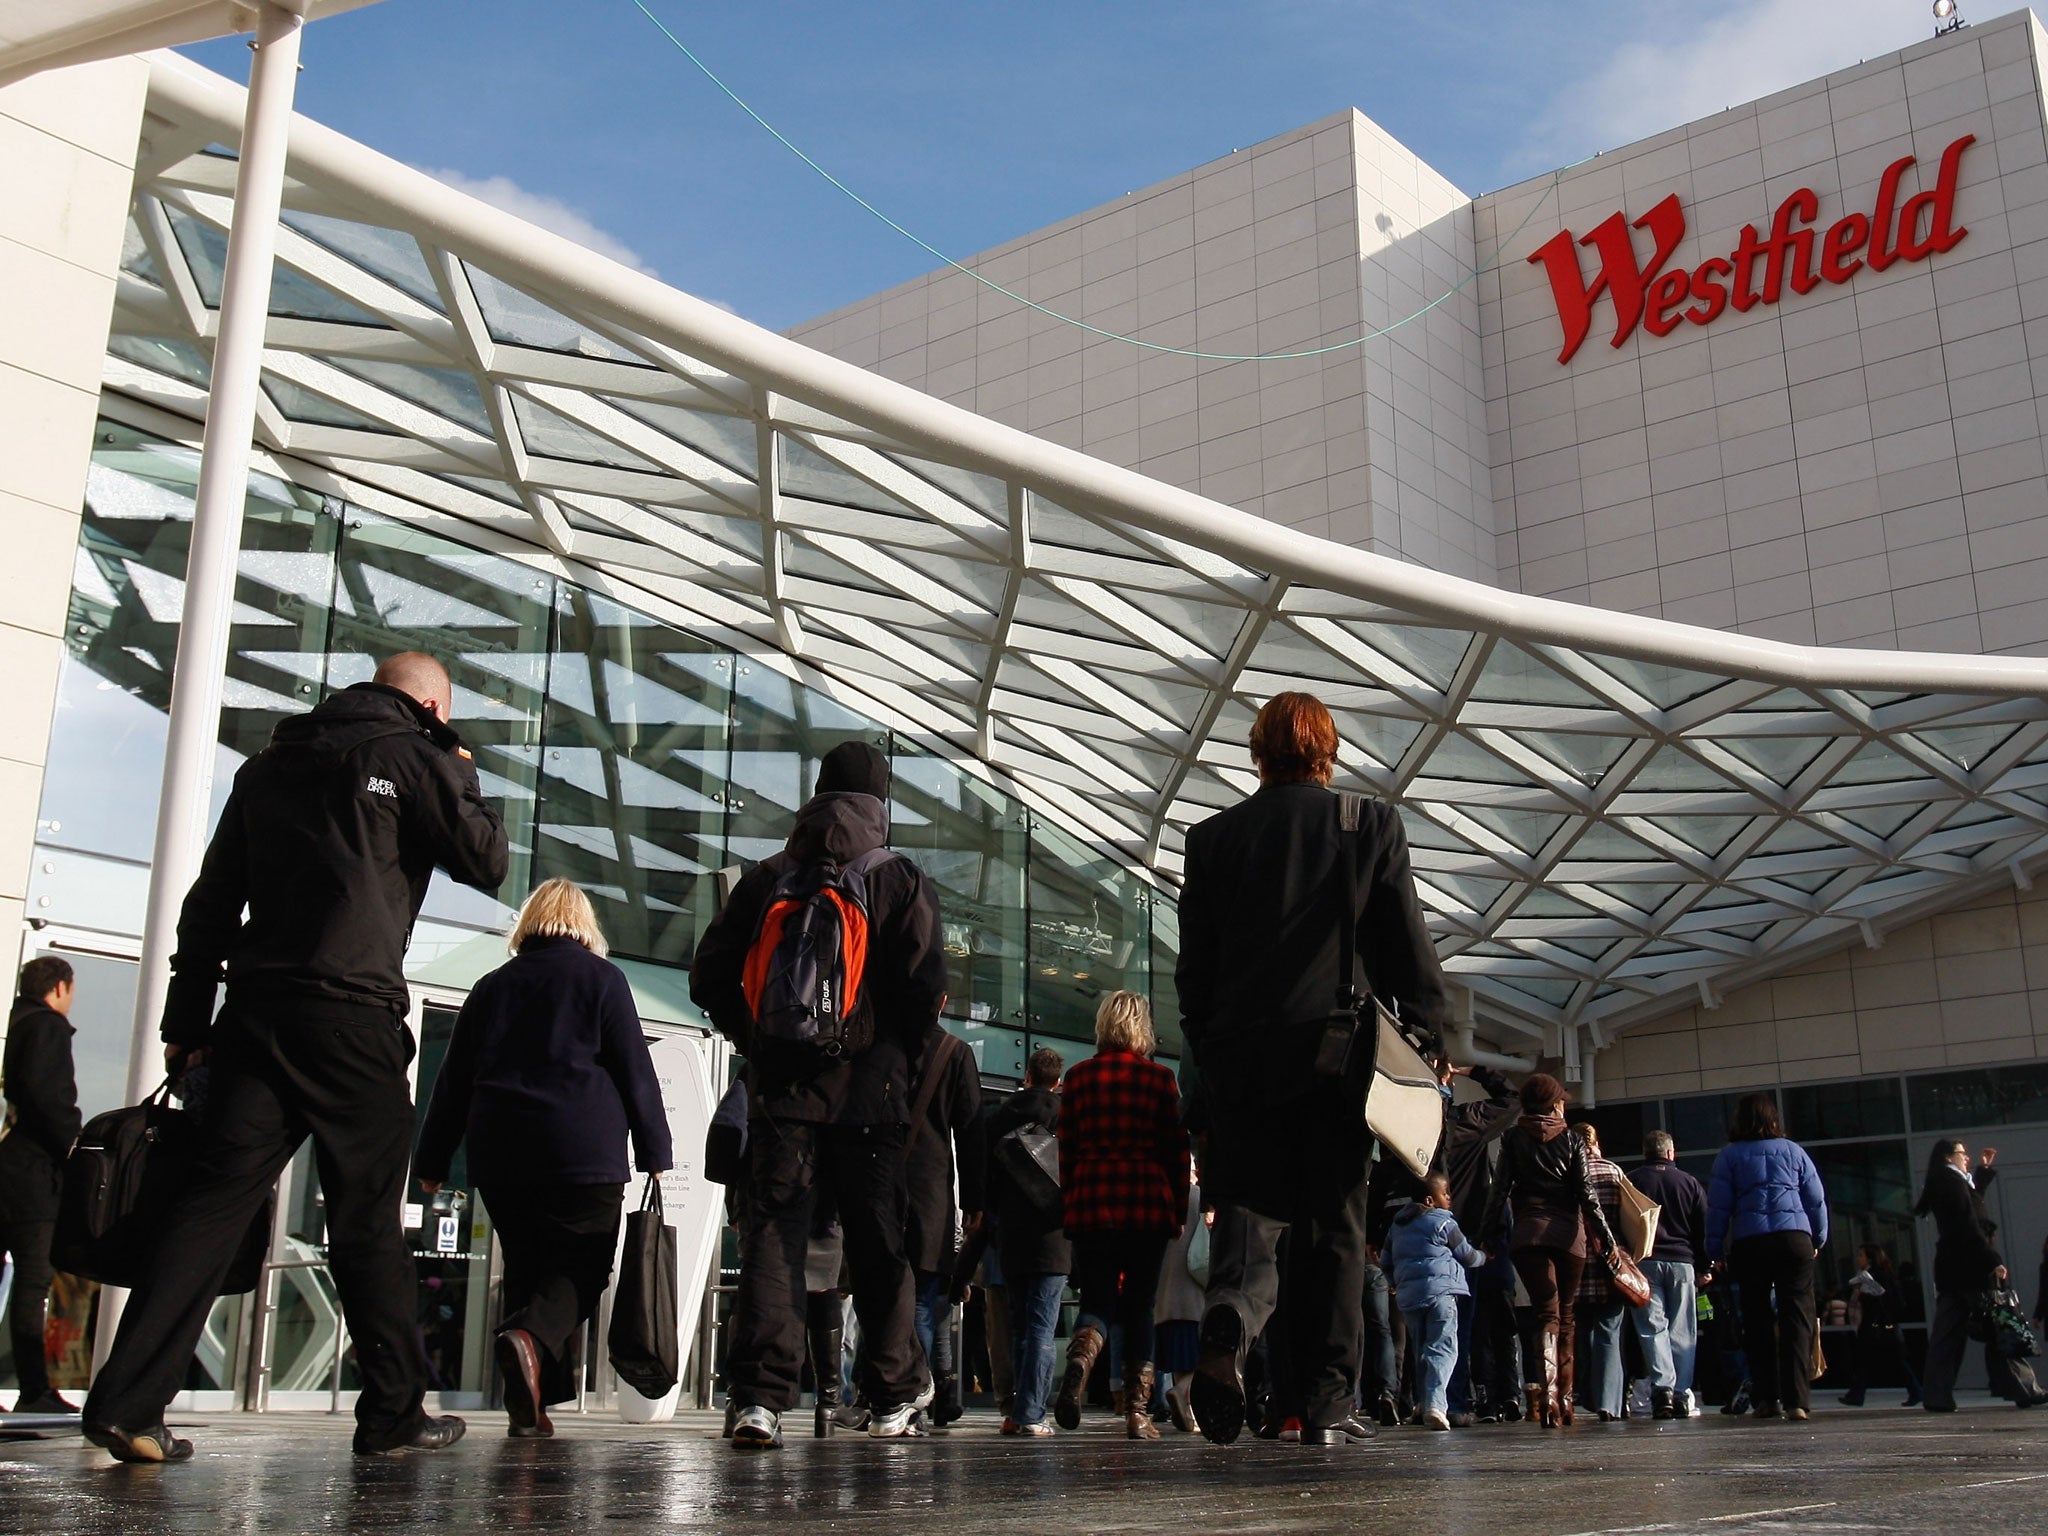 The shopping centre is due to open in 2018 and would be Westfield's third retail megaspace after Stratford and Shepherd’s Bush